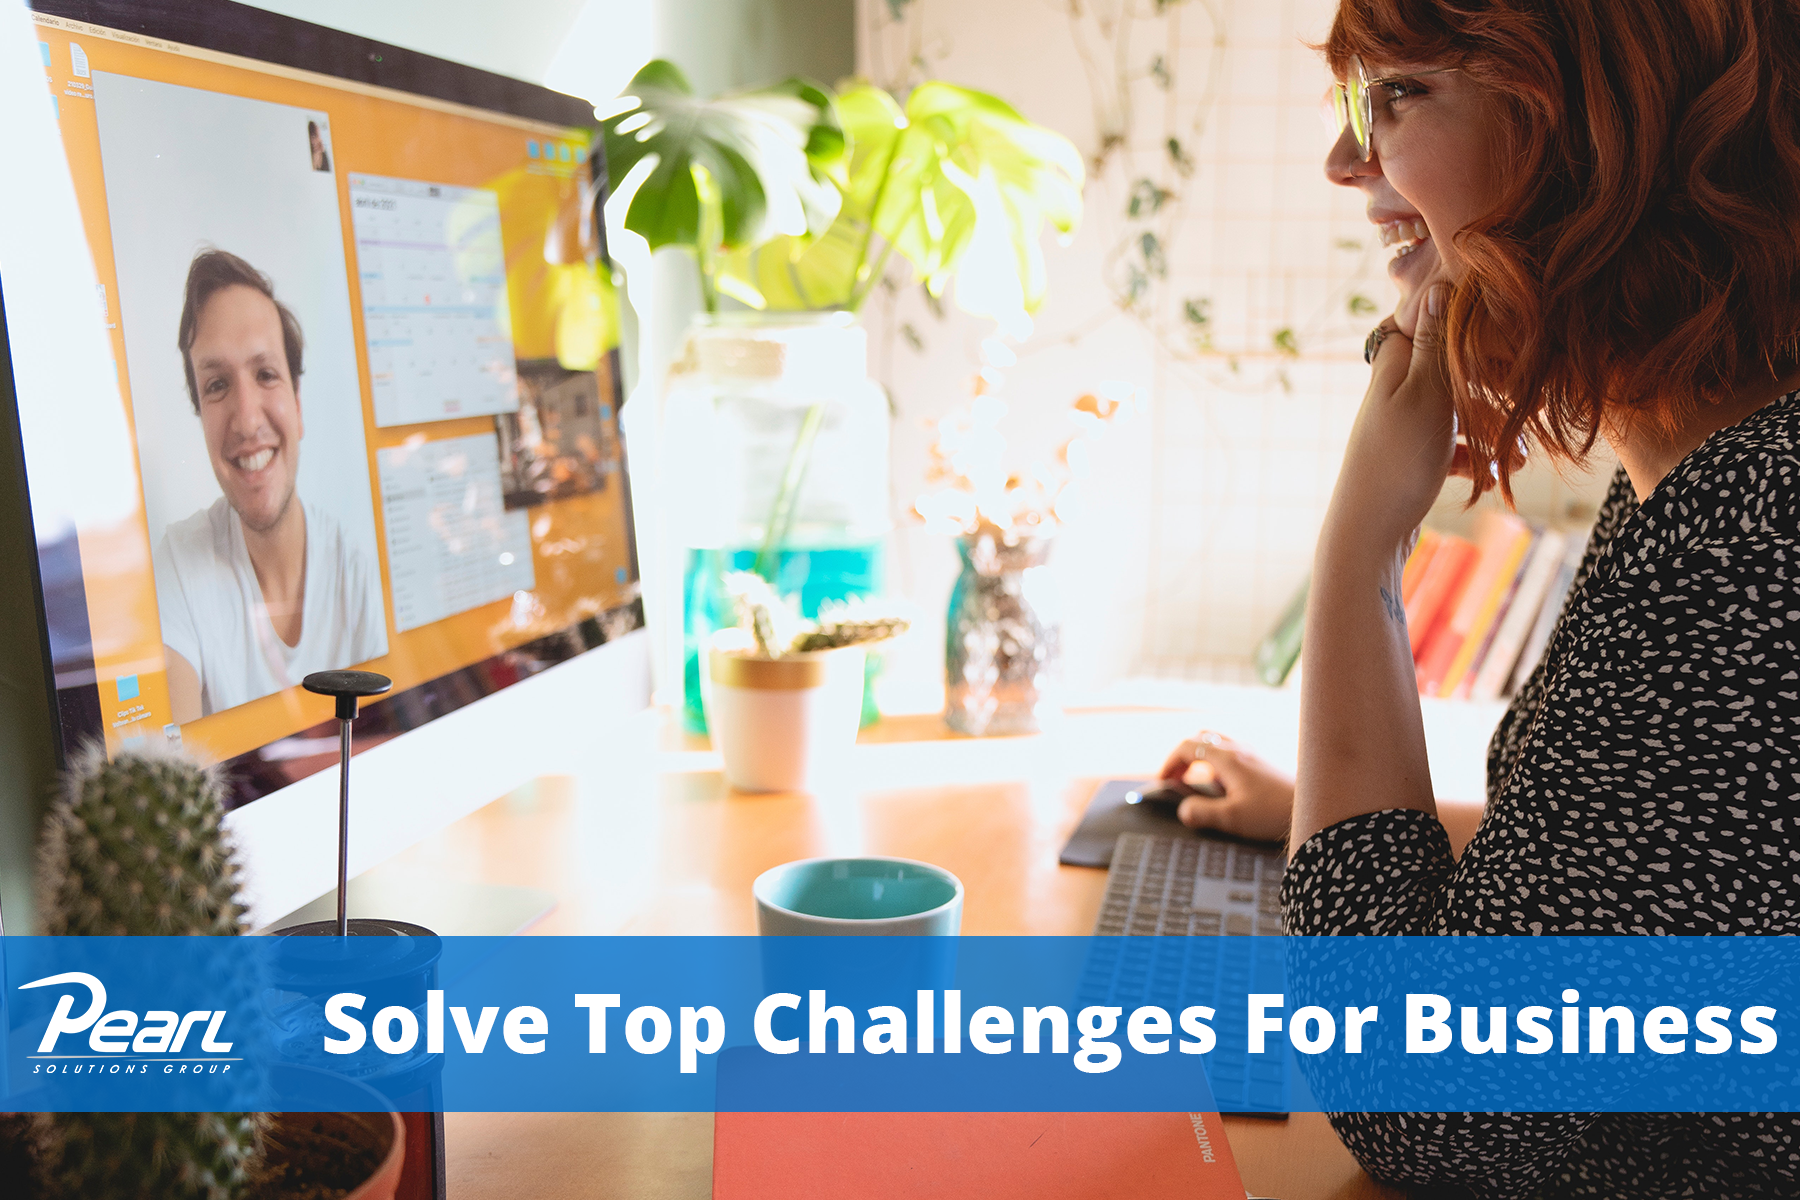 Solve Top Challenges for Business